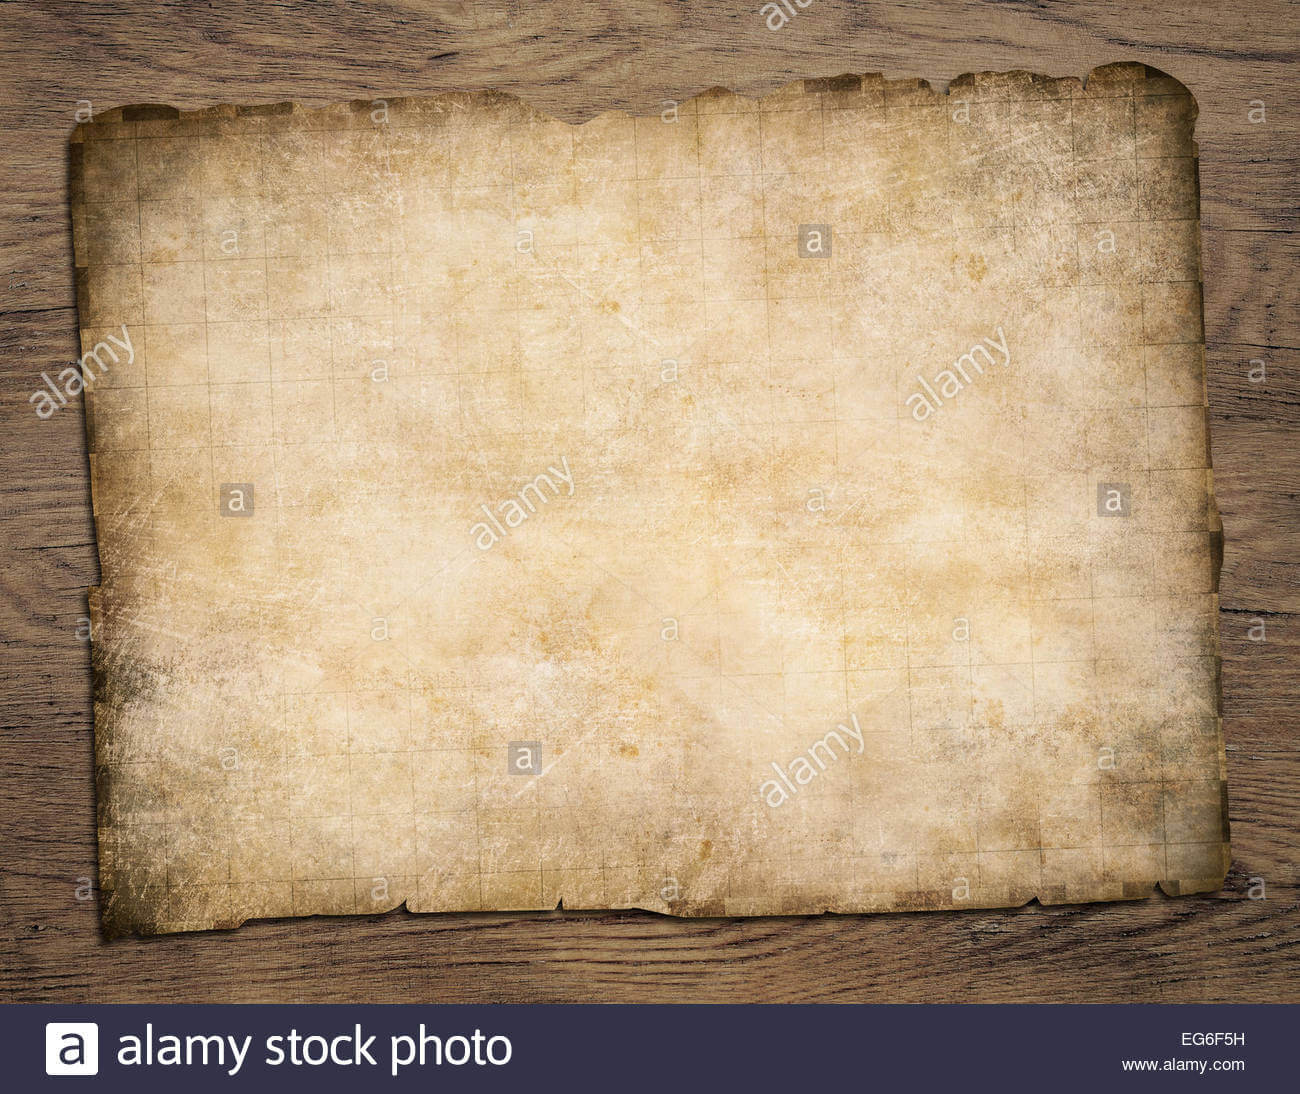 Old Blank Parchment Treasure Map On Wooden Table Stock Photo With Regard To Blank Pirate Map Template